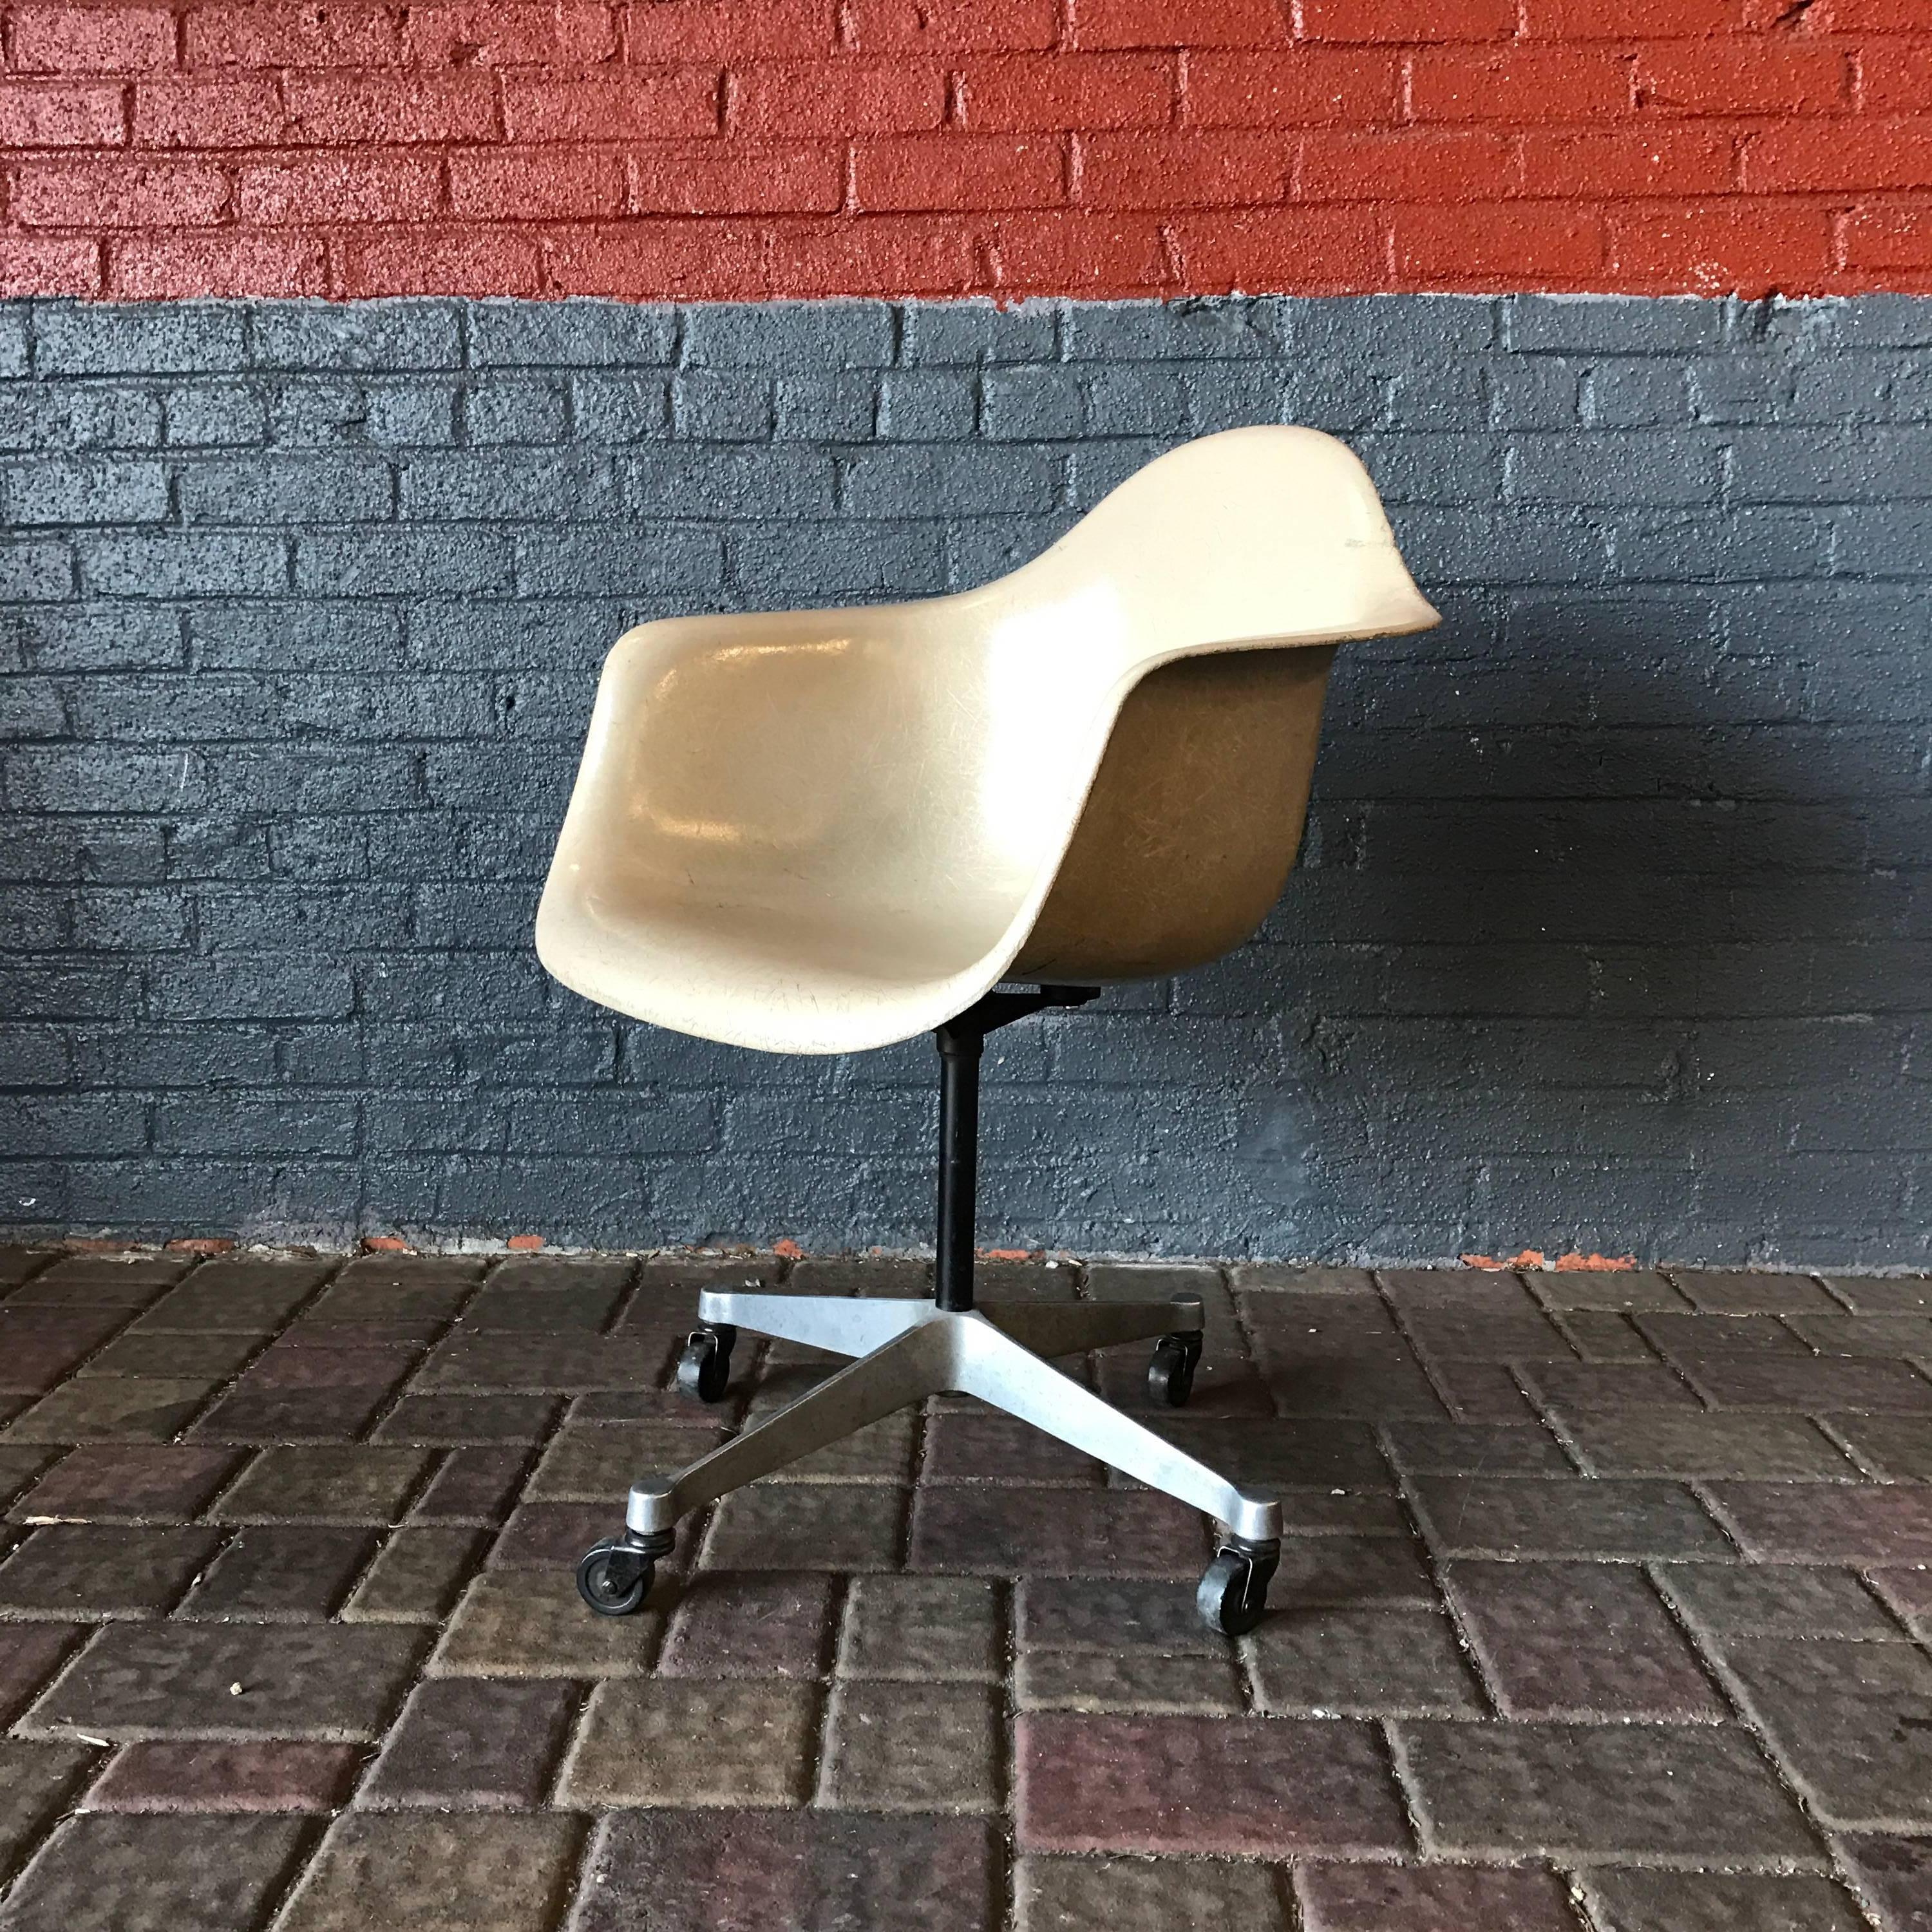 Wow! For your consideration is a rare Eames fiberglass rolling chair. This icon of Mid-Century Modern design was produced in the 1950s by Summit Plastics for Herman Miller. The rolling contract base is hard to find, and a great addition to any home